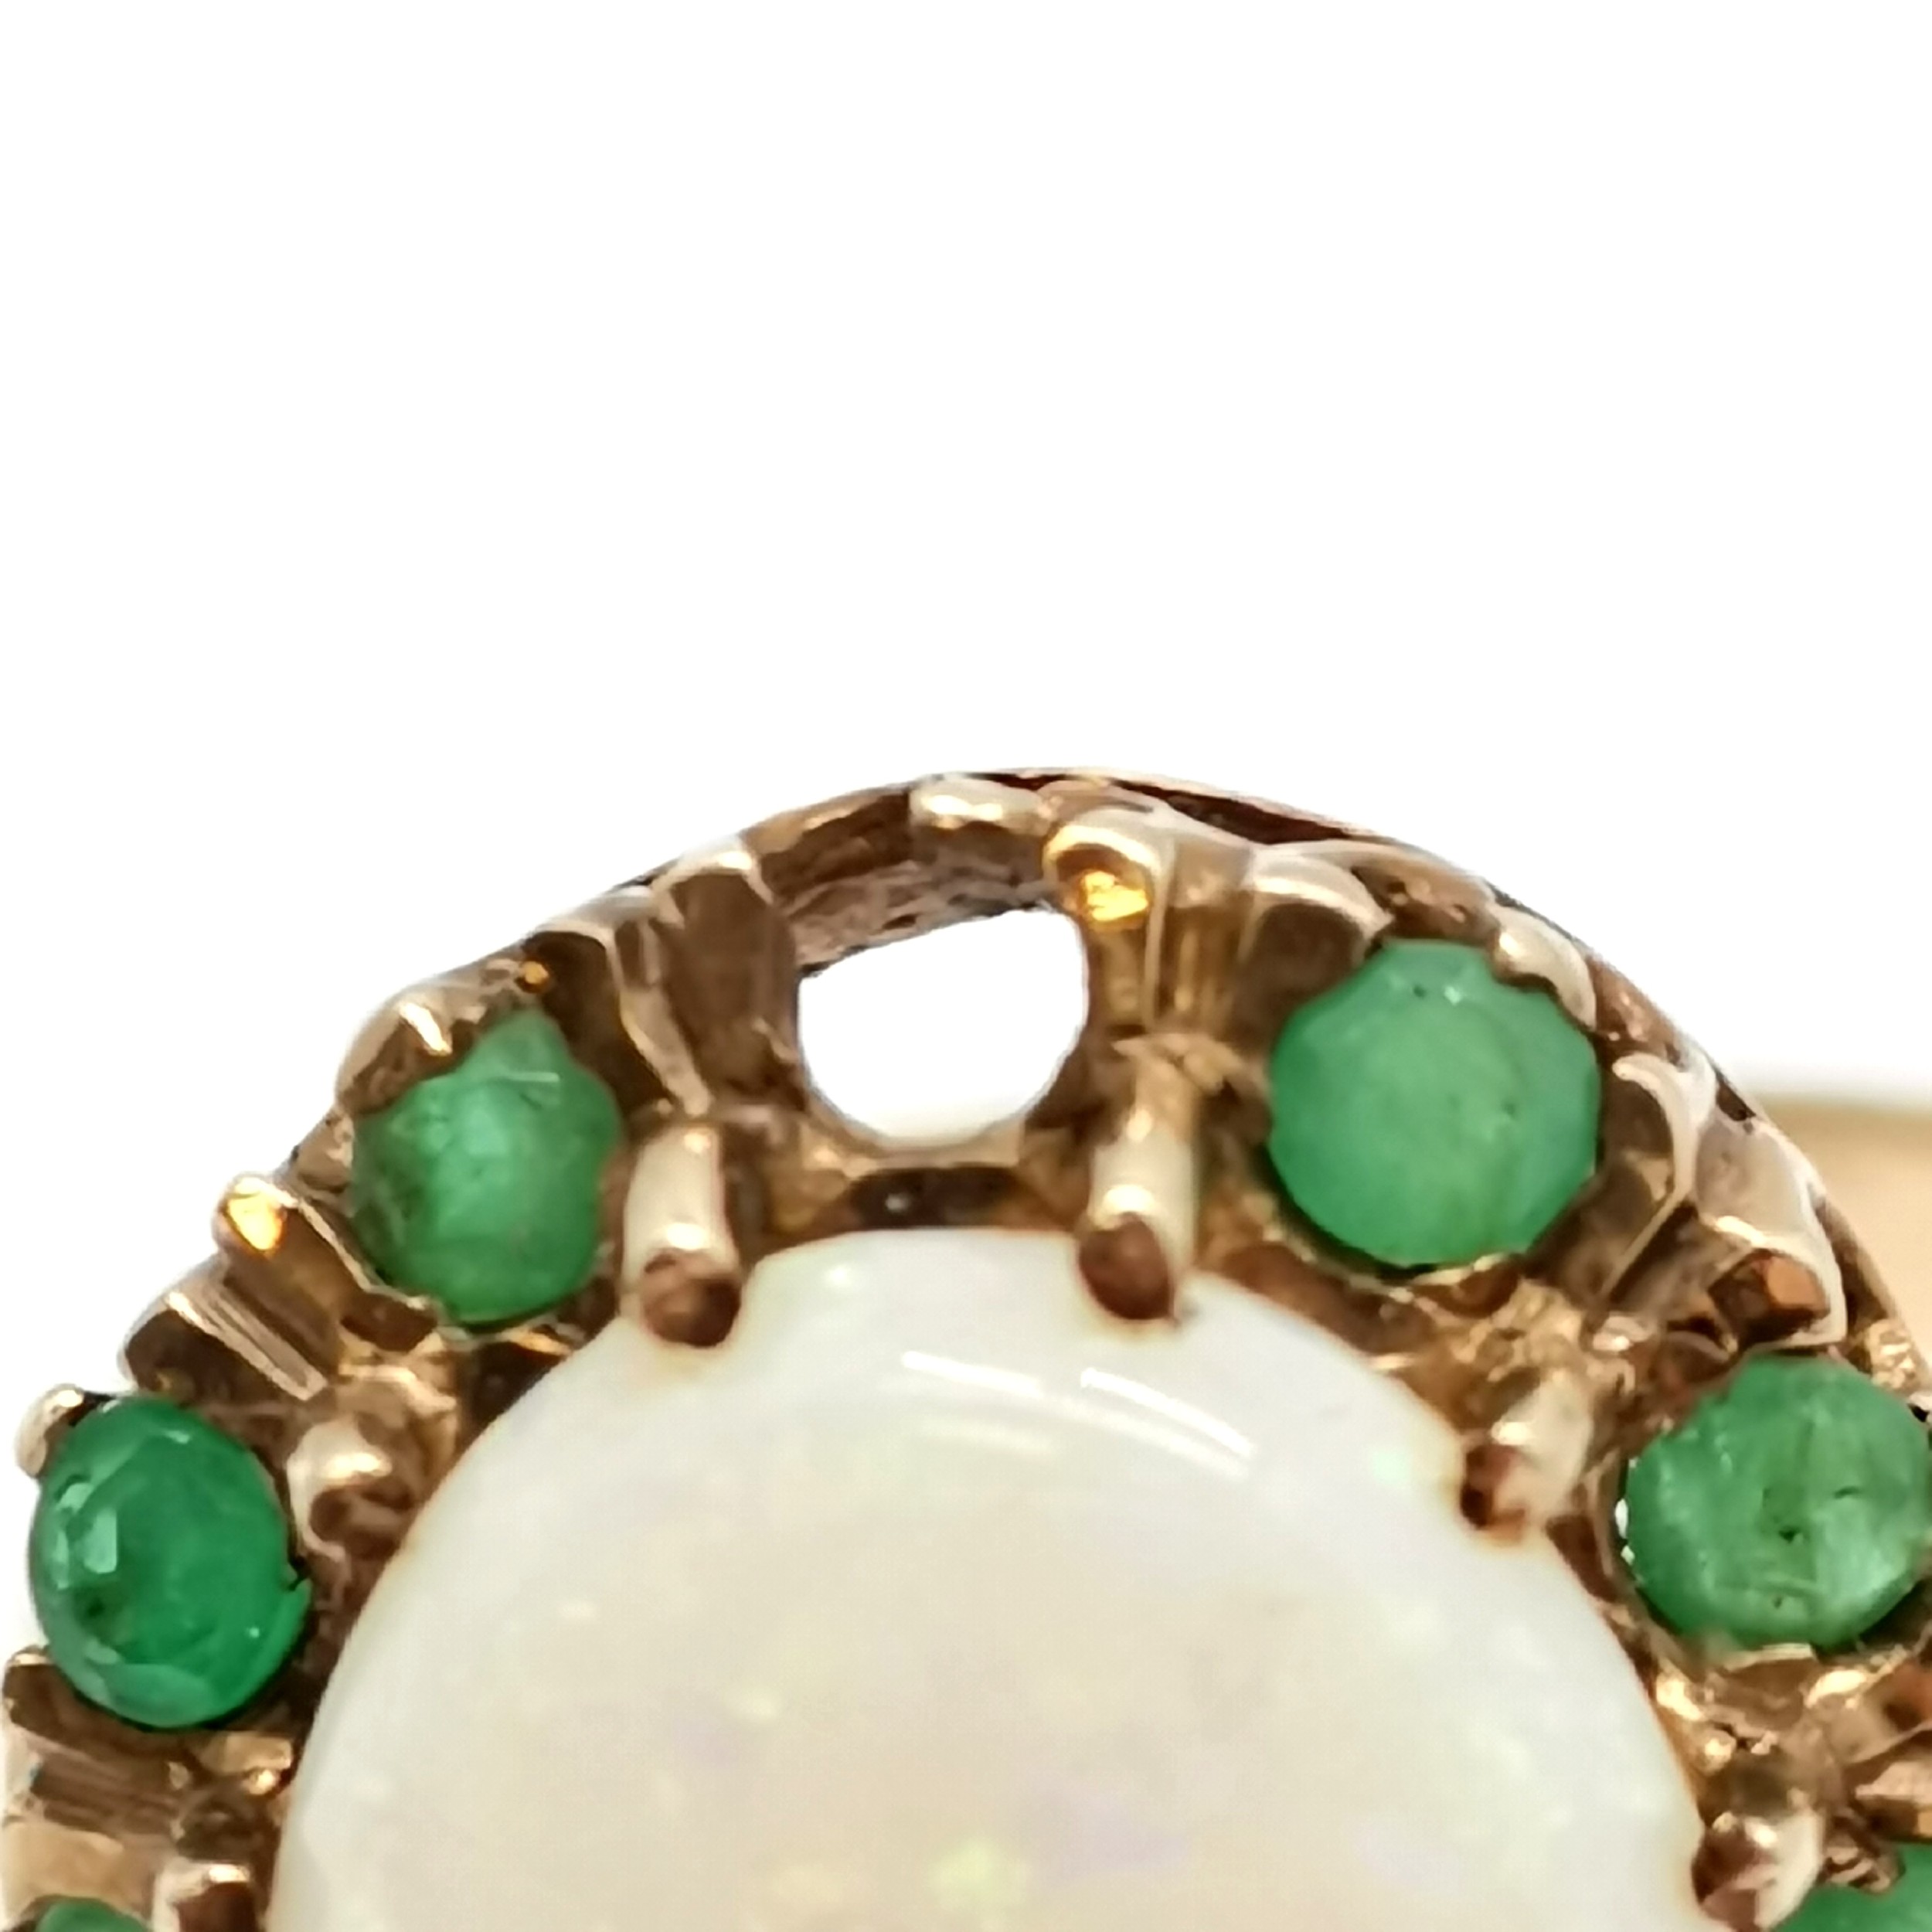 9ct hallmarked gold opal / emerald stone set cluster ring (1 stone missing) size O t/w 9ct - Image 4 of 4